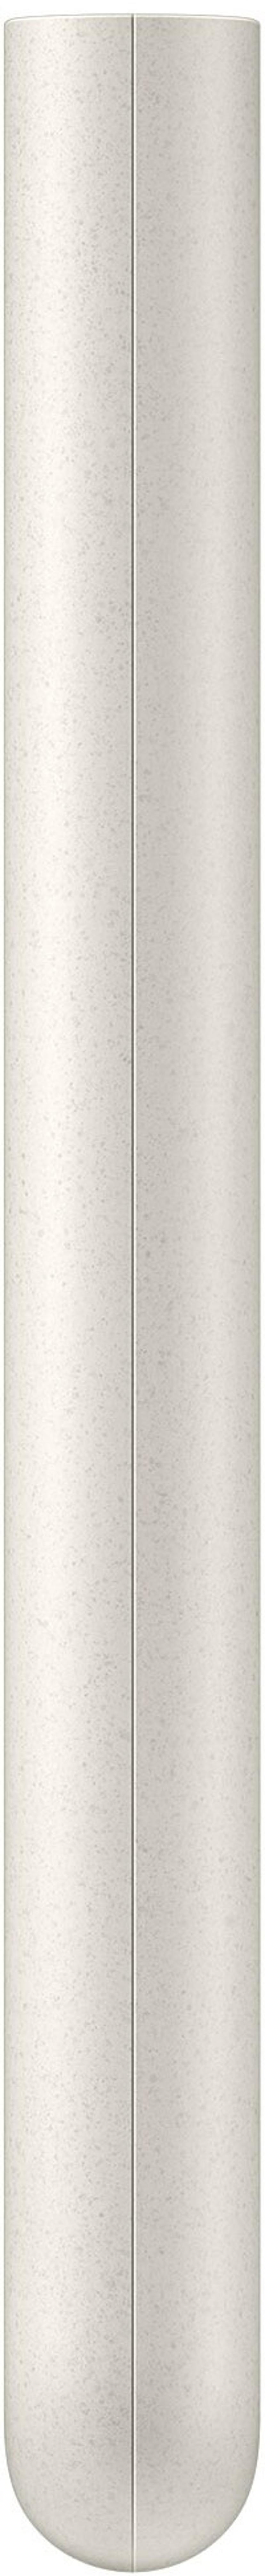 Samsung Portable Battery Pack 10000milliampere hour 2.77A Beige